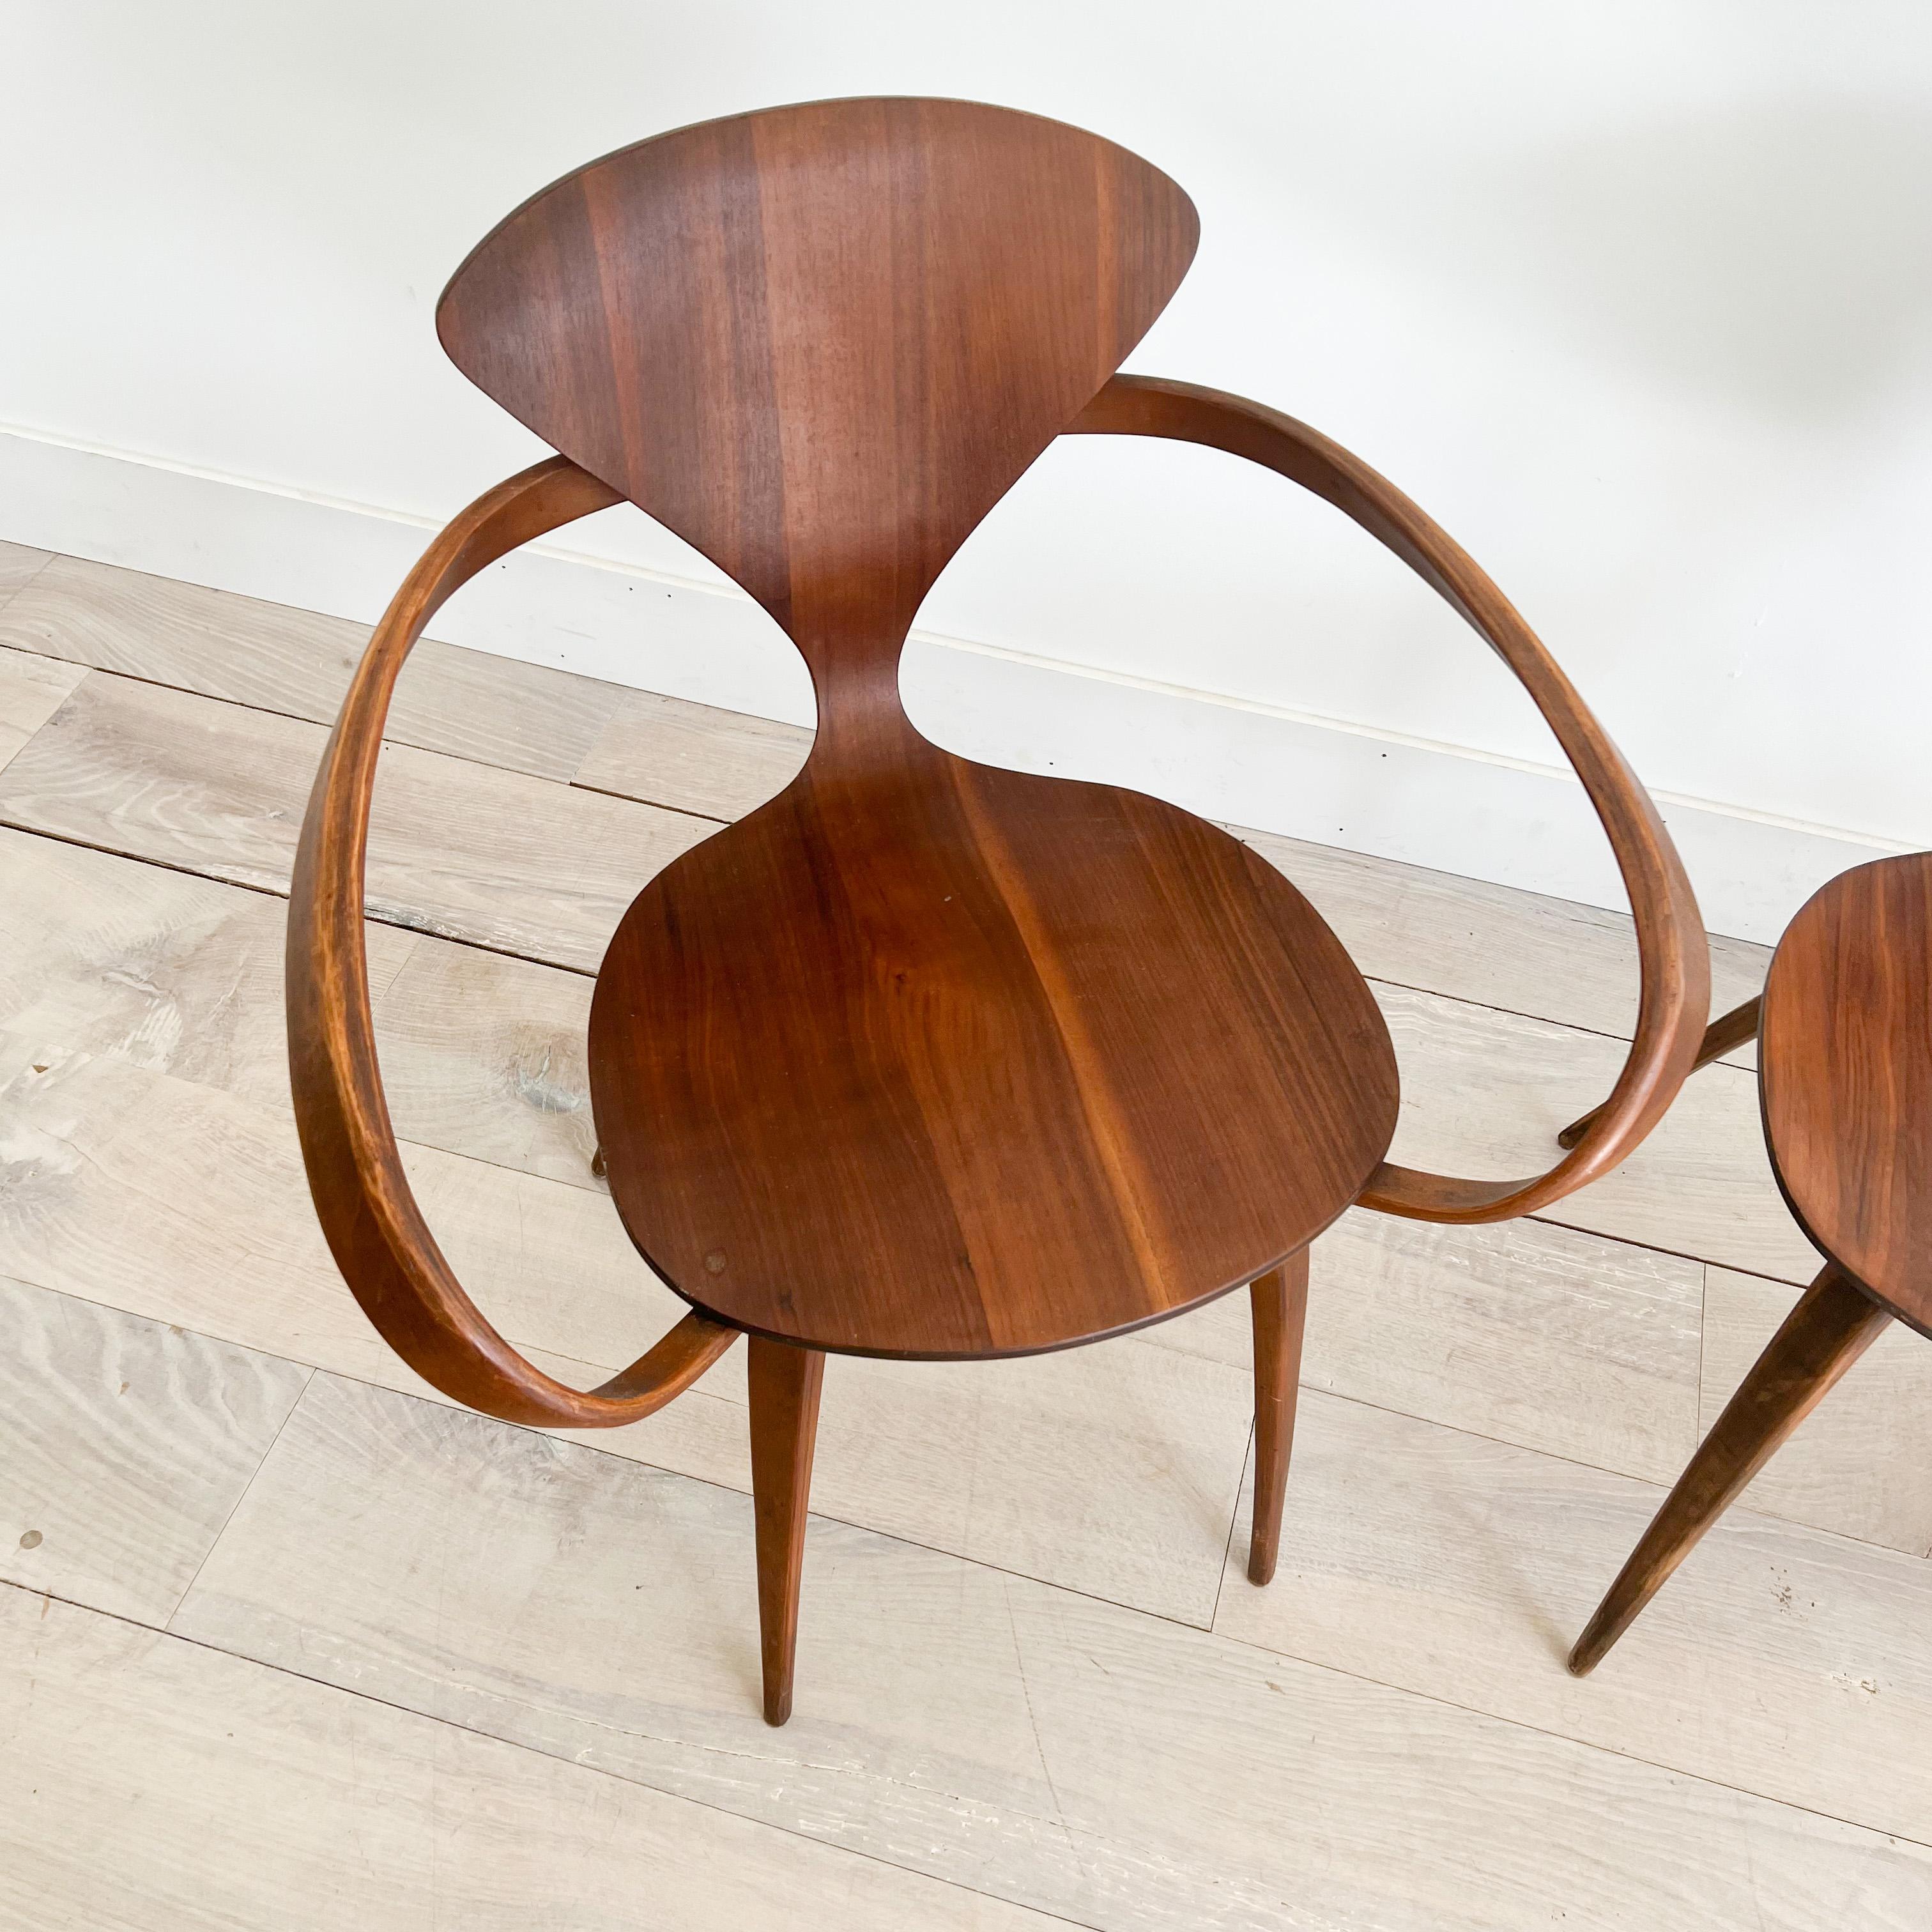 Set of 4 hard to find Mid-Century Modern sculpted “Pretzel” chairs by Norman Cherner for Plycraft. Some scuffing/scratching/small areas of veneer repair from age appropriate wear (see photos for examples). One chair has the Plycraft tag under the